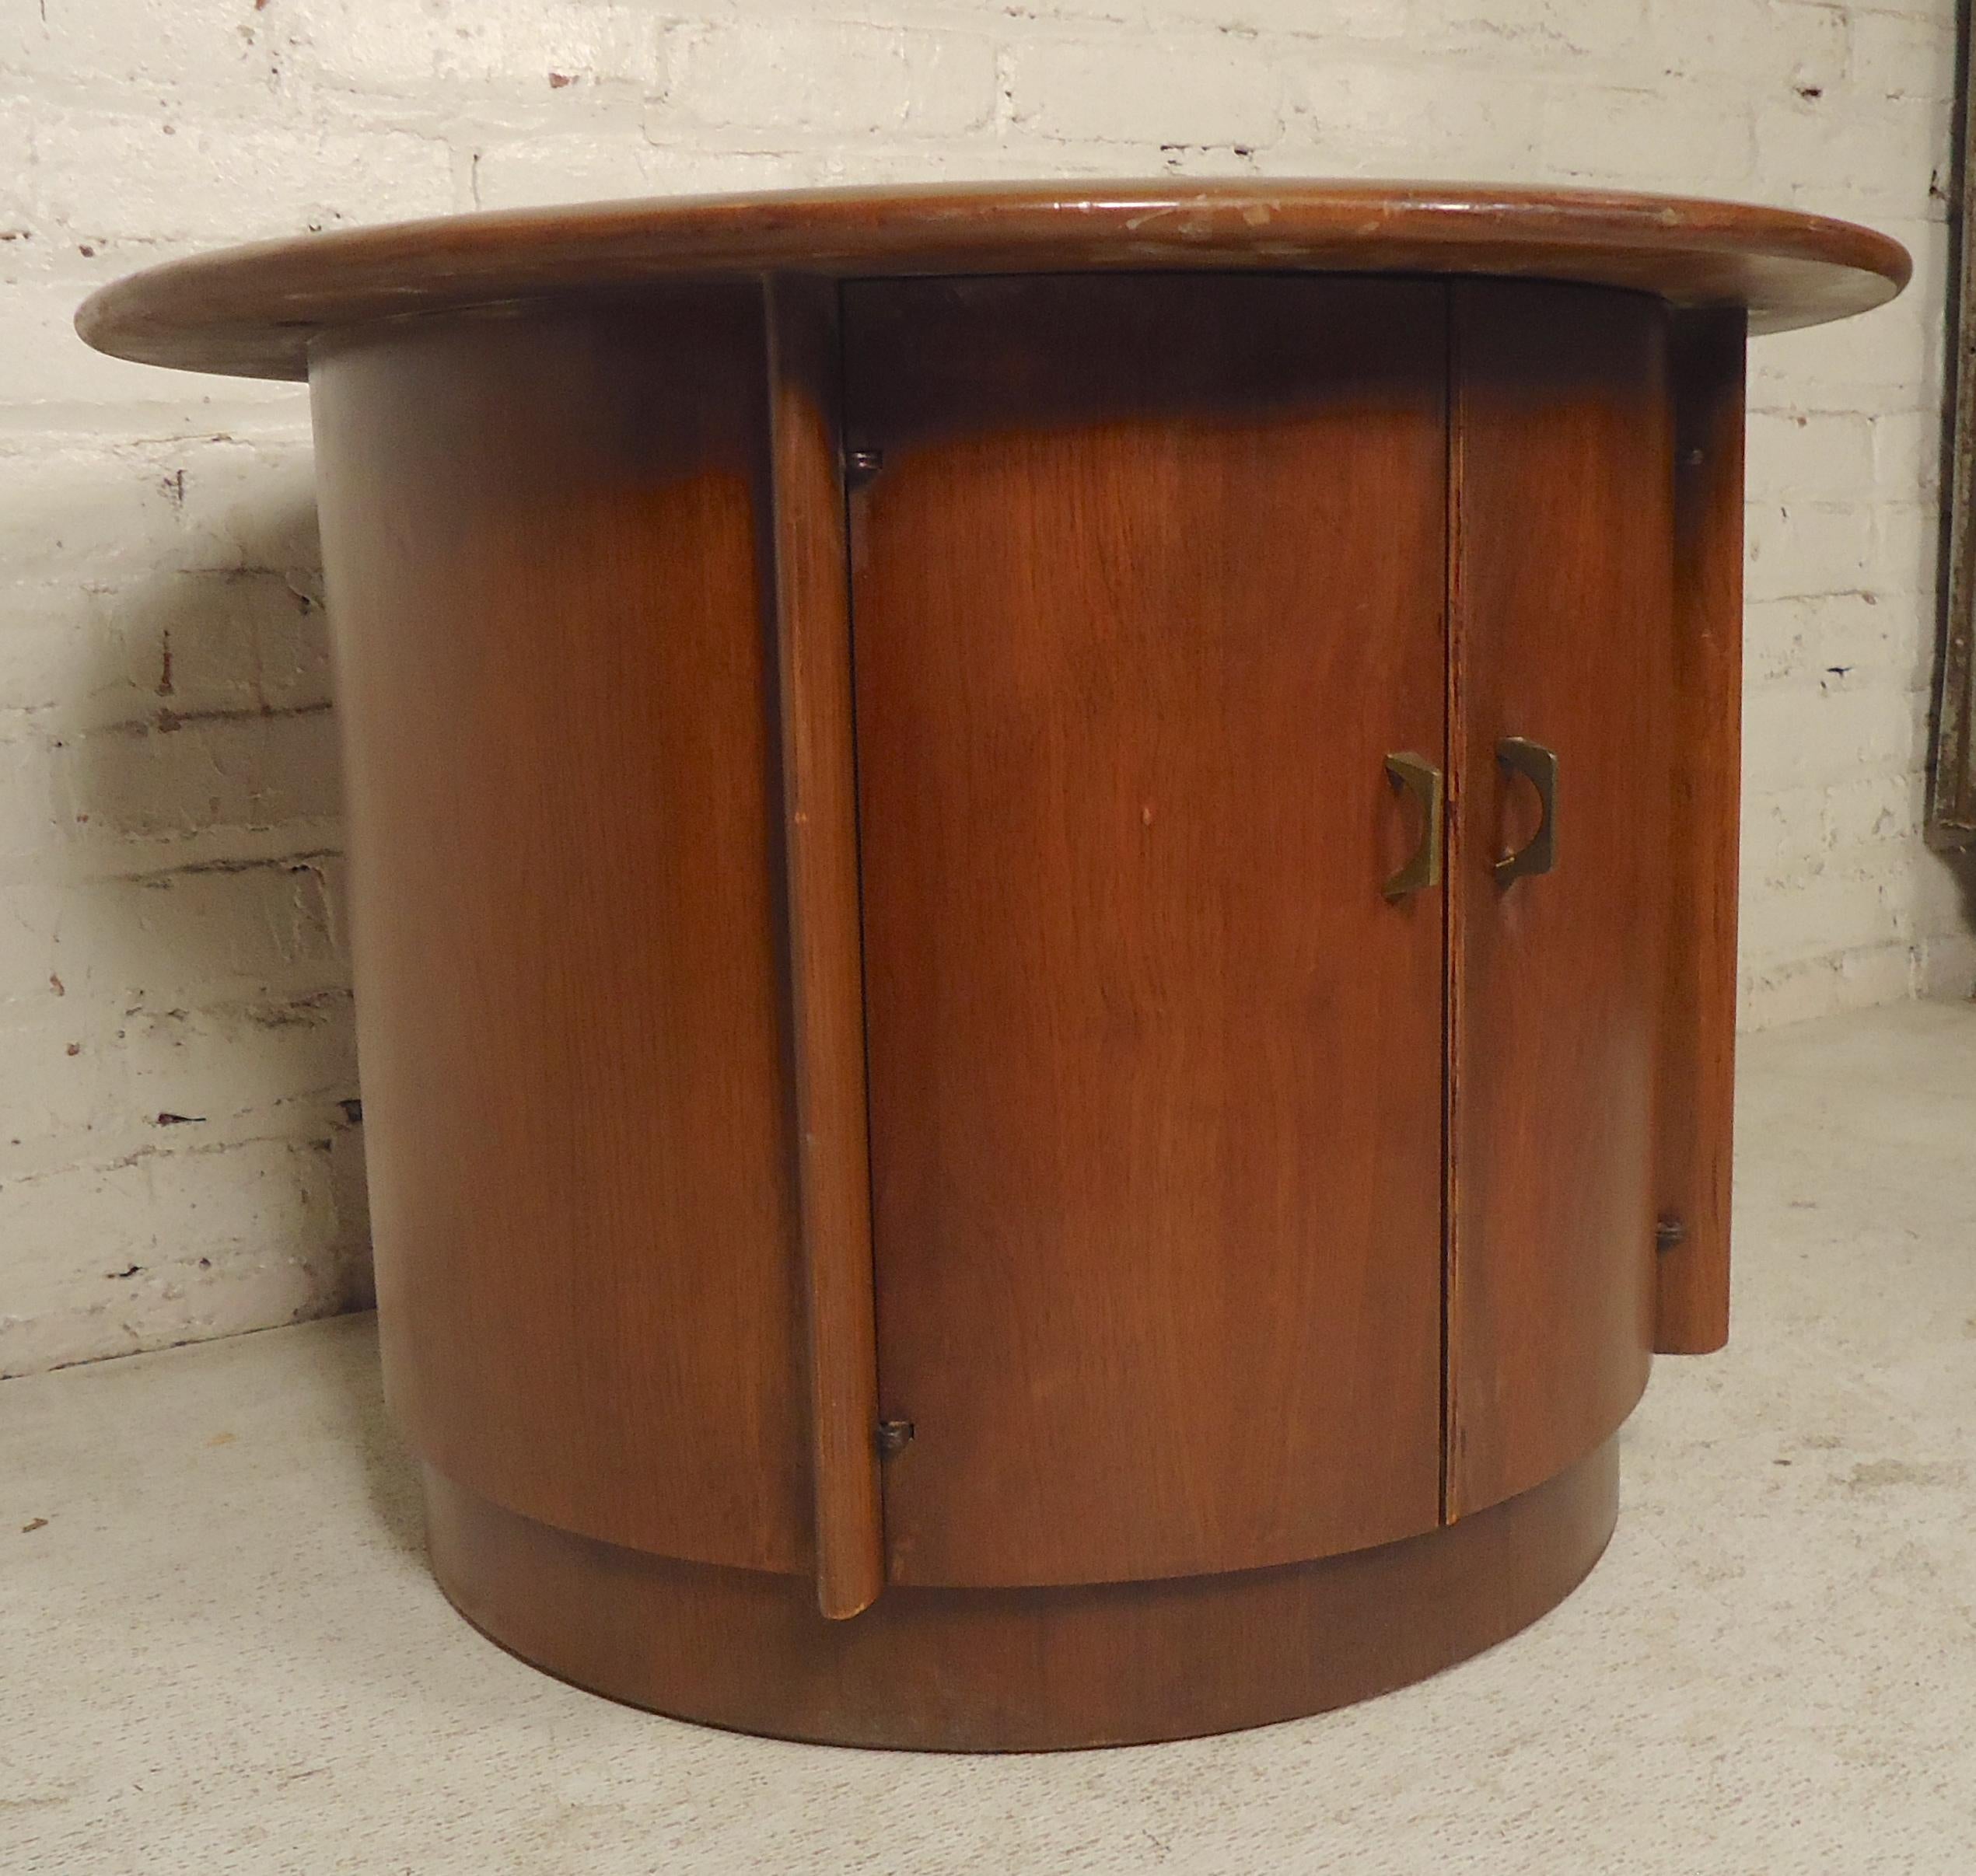 Round table with storage. Great for home or office.
(Please confirm item location - NY or NJ - with dealer).
  